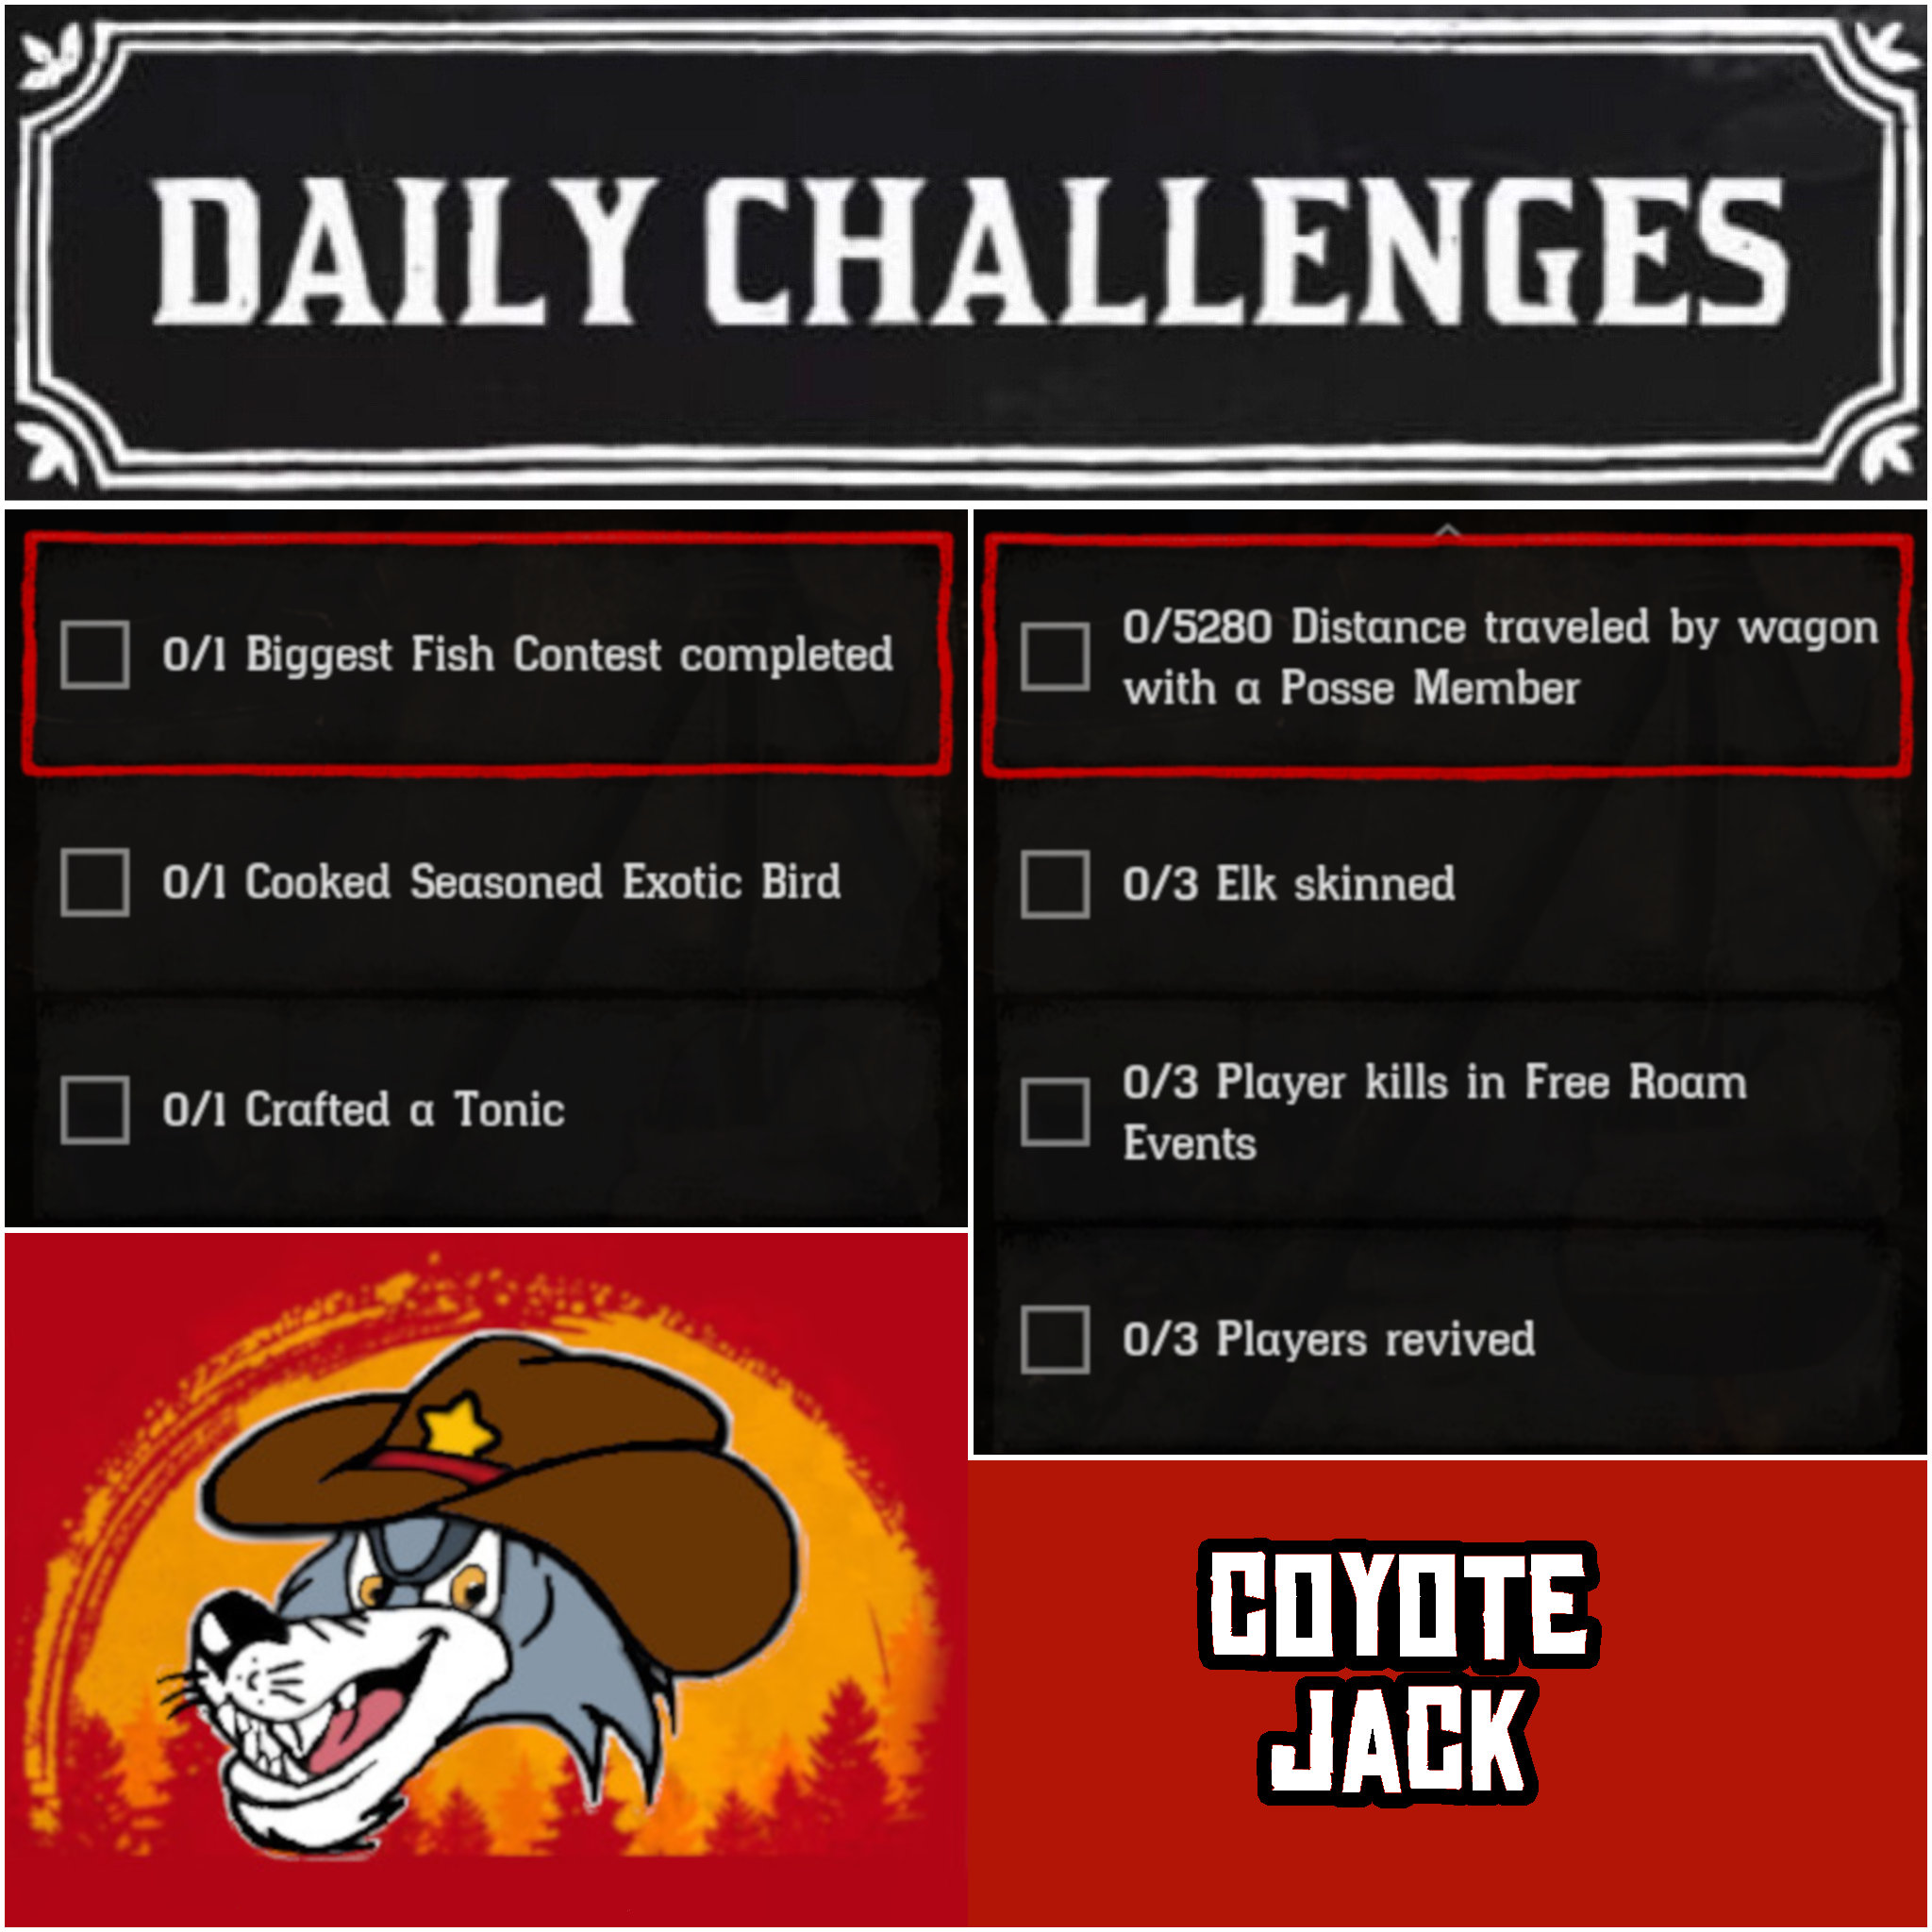 You are currently viewing Wednesday 03 February Daily Challenges